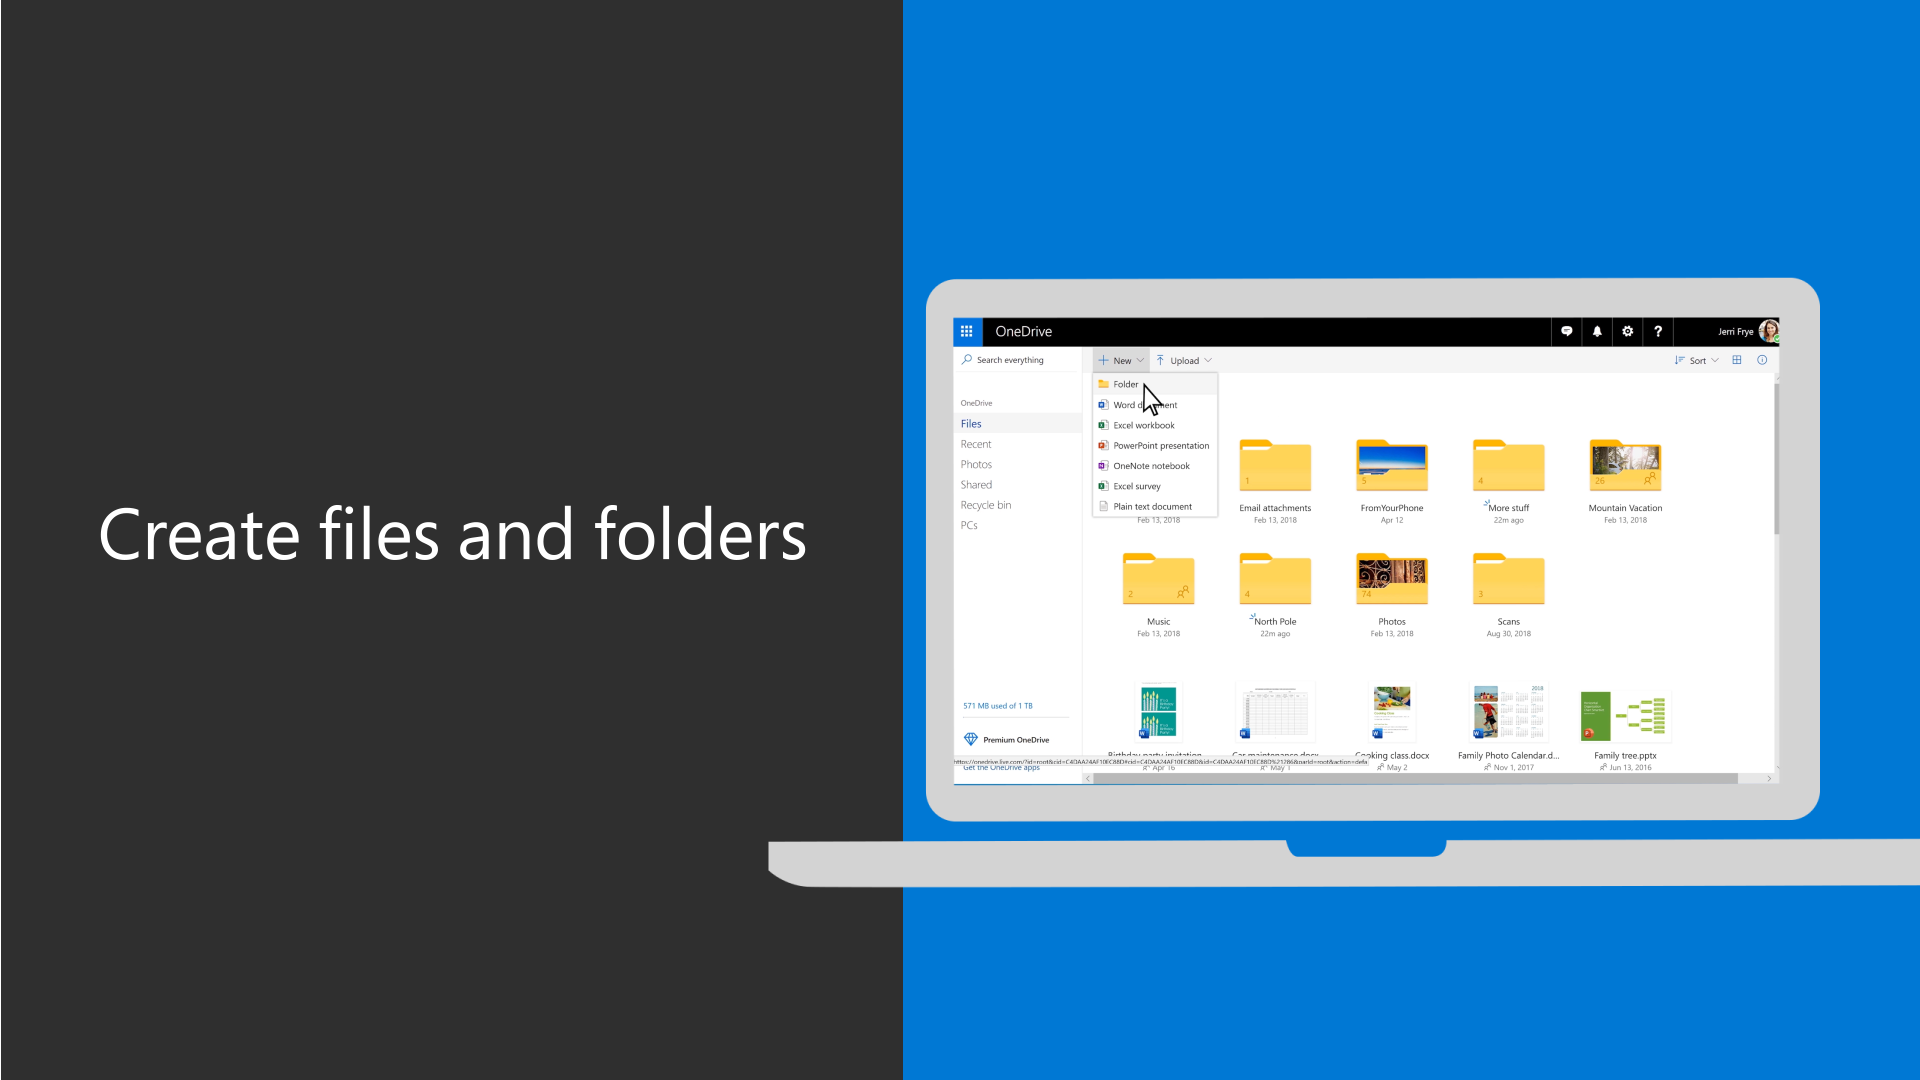 Upload photos and files to OneDrive - Microsoft Support